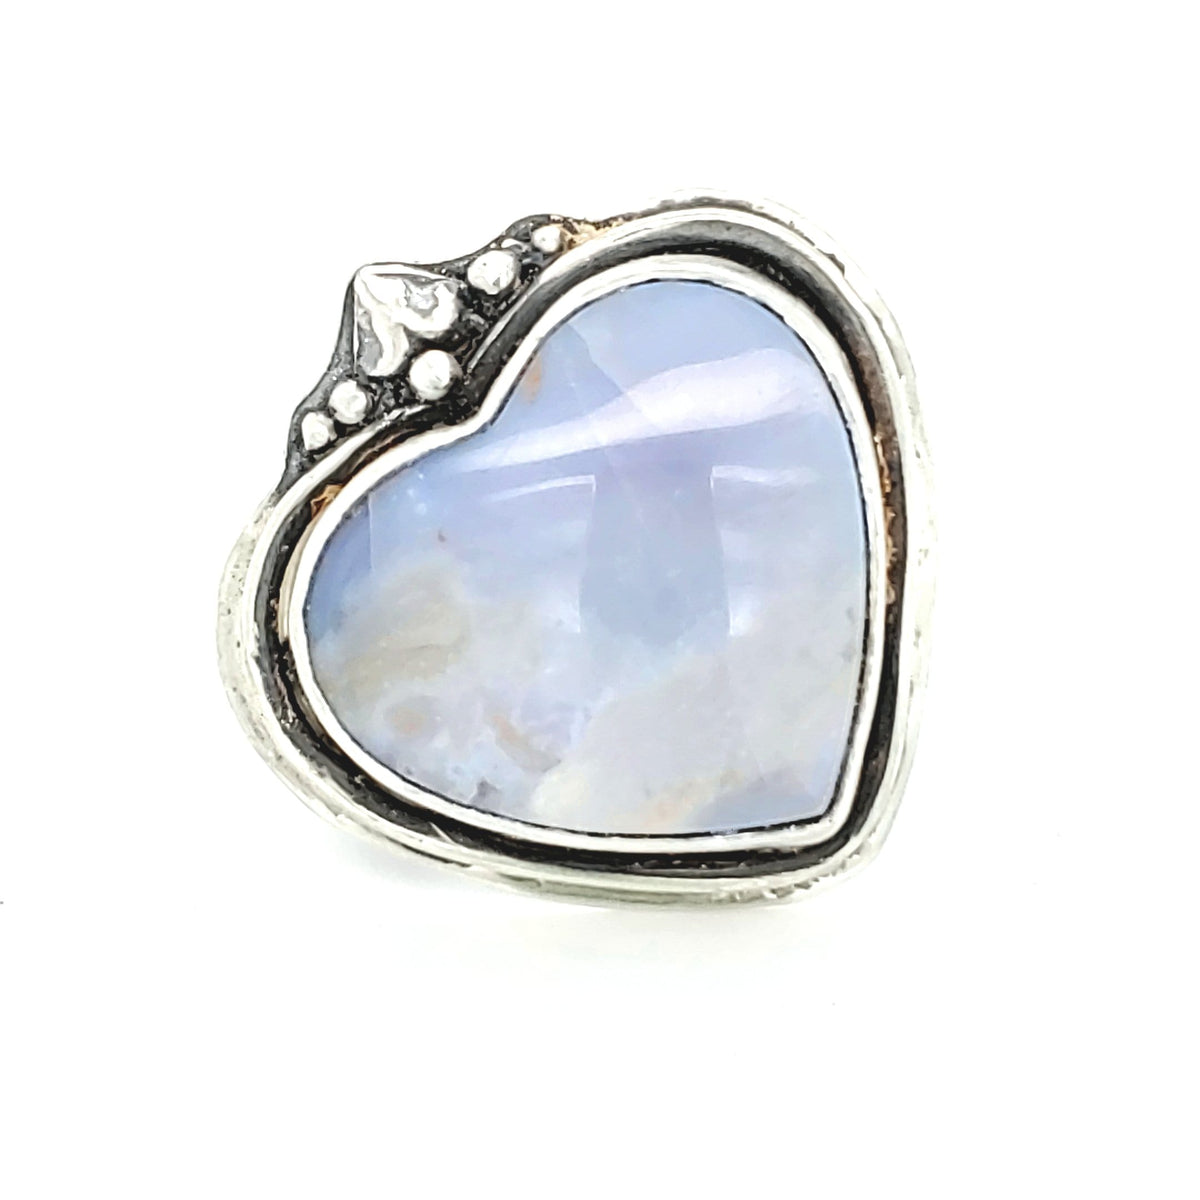 janet lasher Jewelry Ring Lavender Plume Agate Flourish Heart Ring